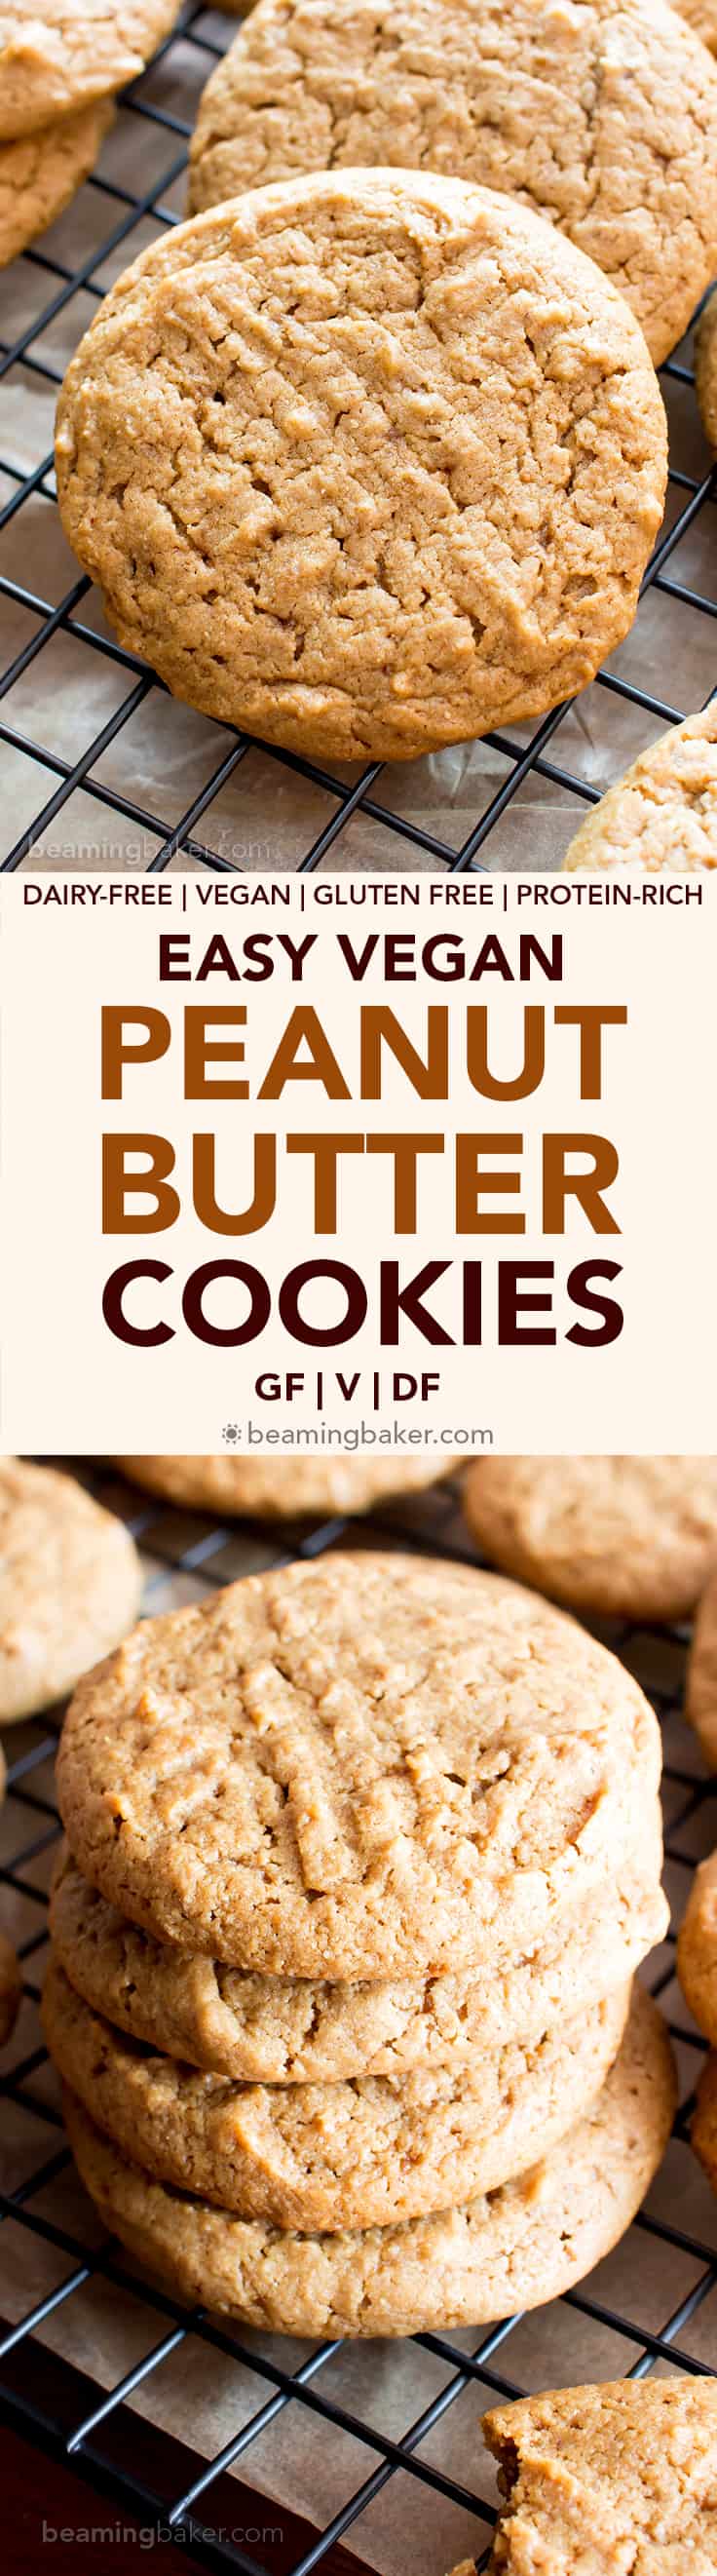 Easy Vegan Peanut Butter Cookies (V, GF): an easy recipe for comforting peanut butter cookies that are lightly crispy on the outside, soft and chewy on the inside, made with healthy, whole ingredients! #Vegan #GlutenFree #DairyFree #Healthy #Dessert #ProteinRich | Recipe on BeamingBaker.com